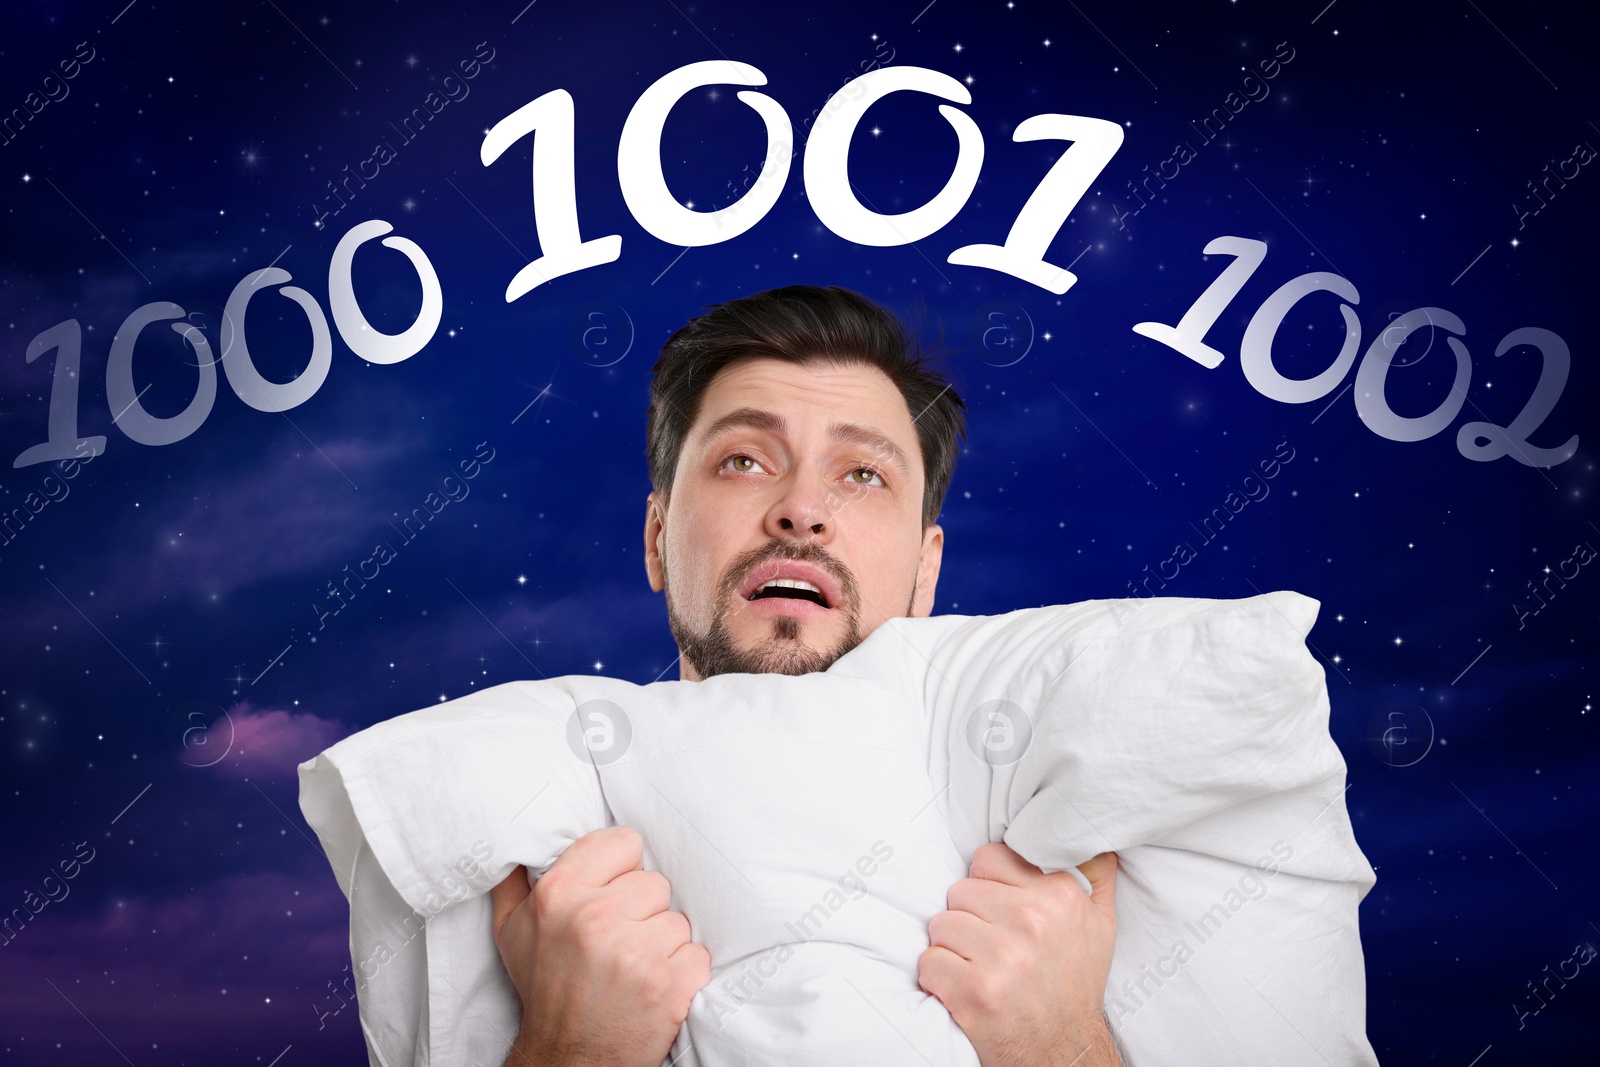 Image of Insomnia. Exhausted man counting to fall asleep. Numbers flying above him against night sky